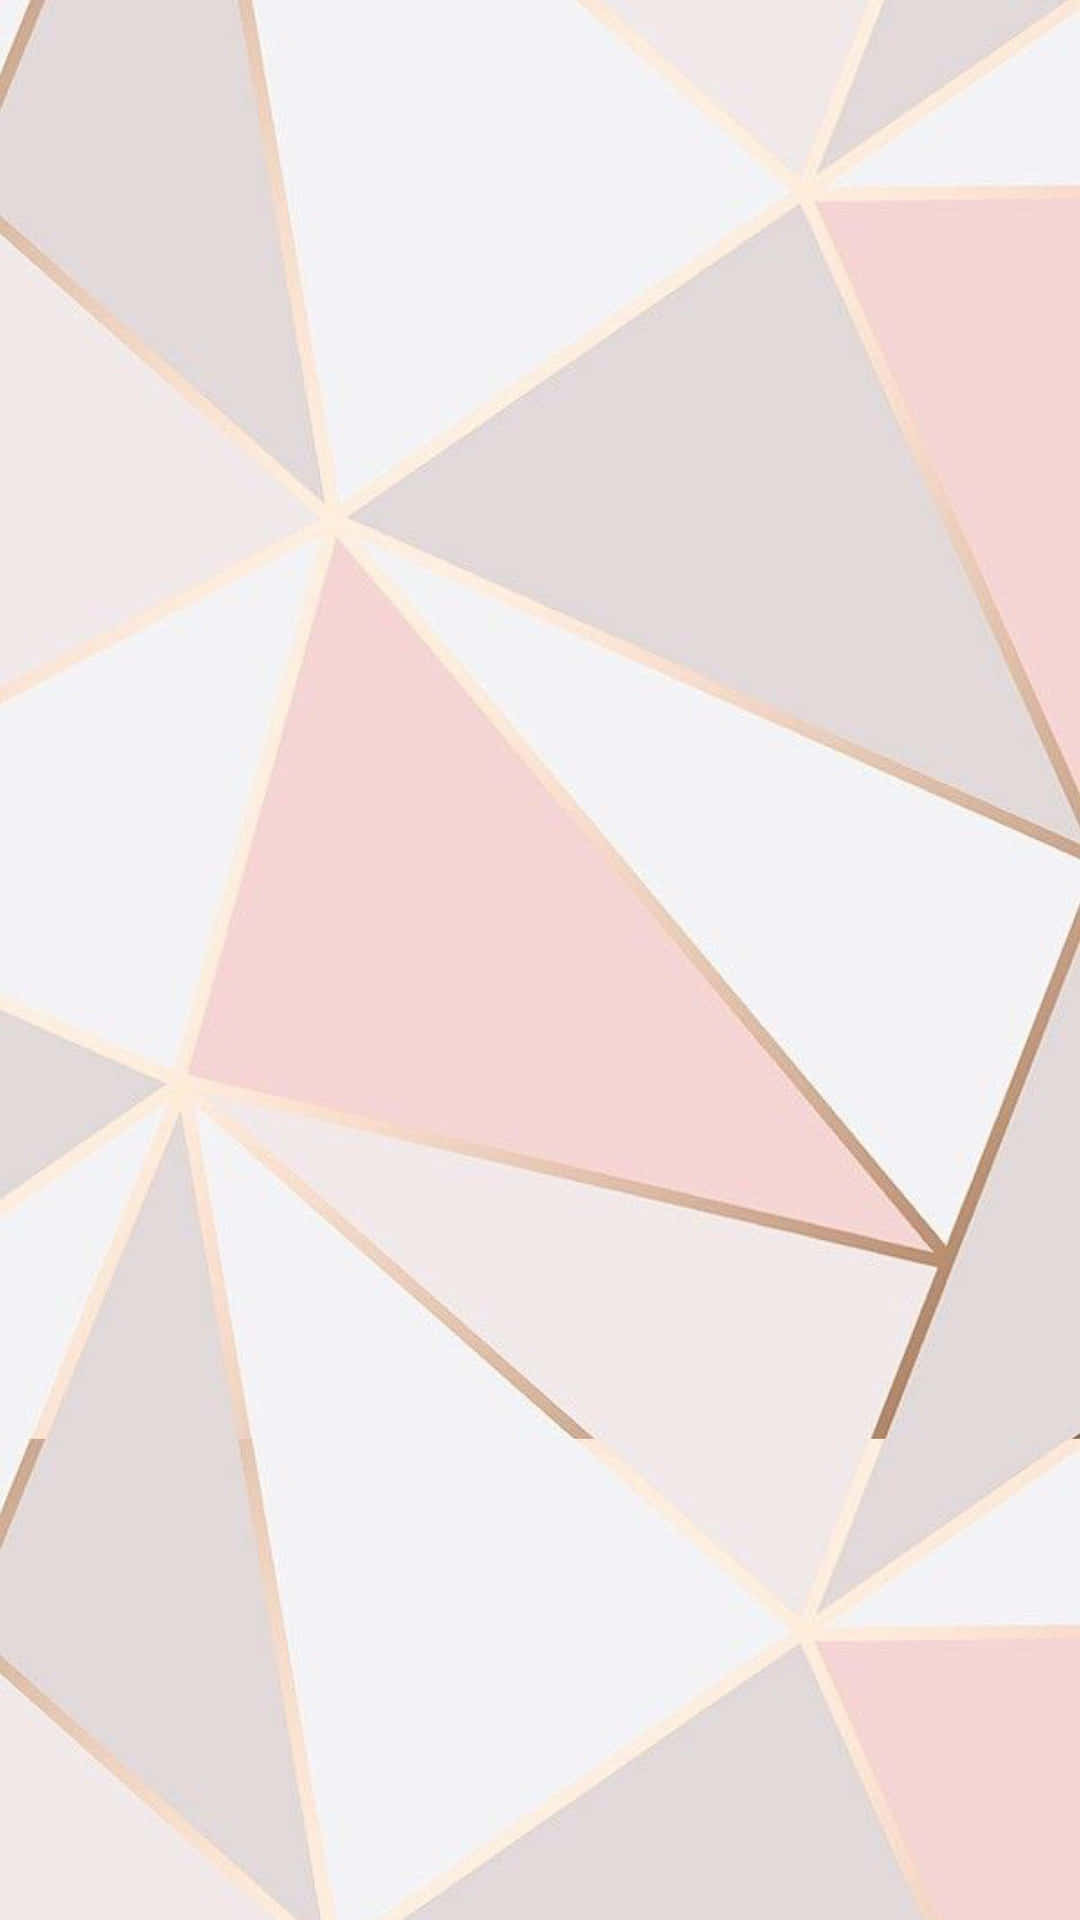 Caption: Luxurious Pink And Gold Wallpaper, A Unique Blend Of Elegance And Glamour